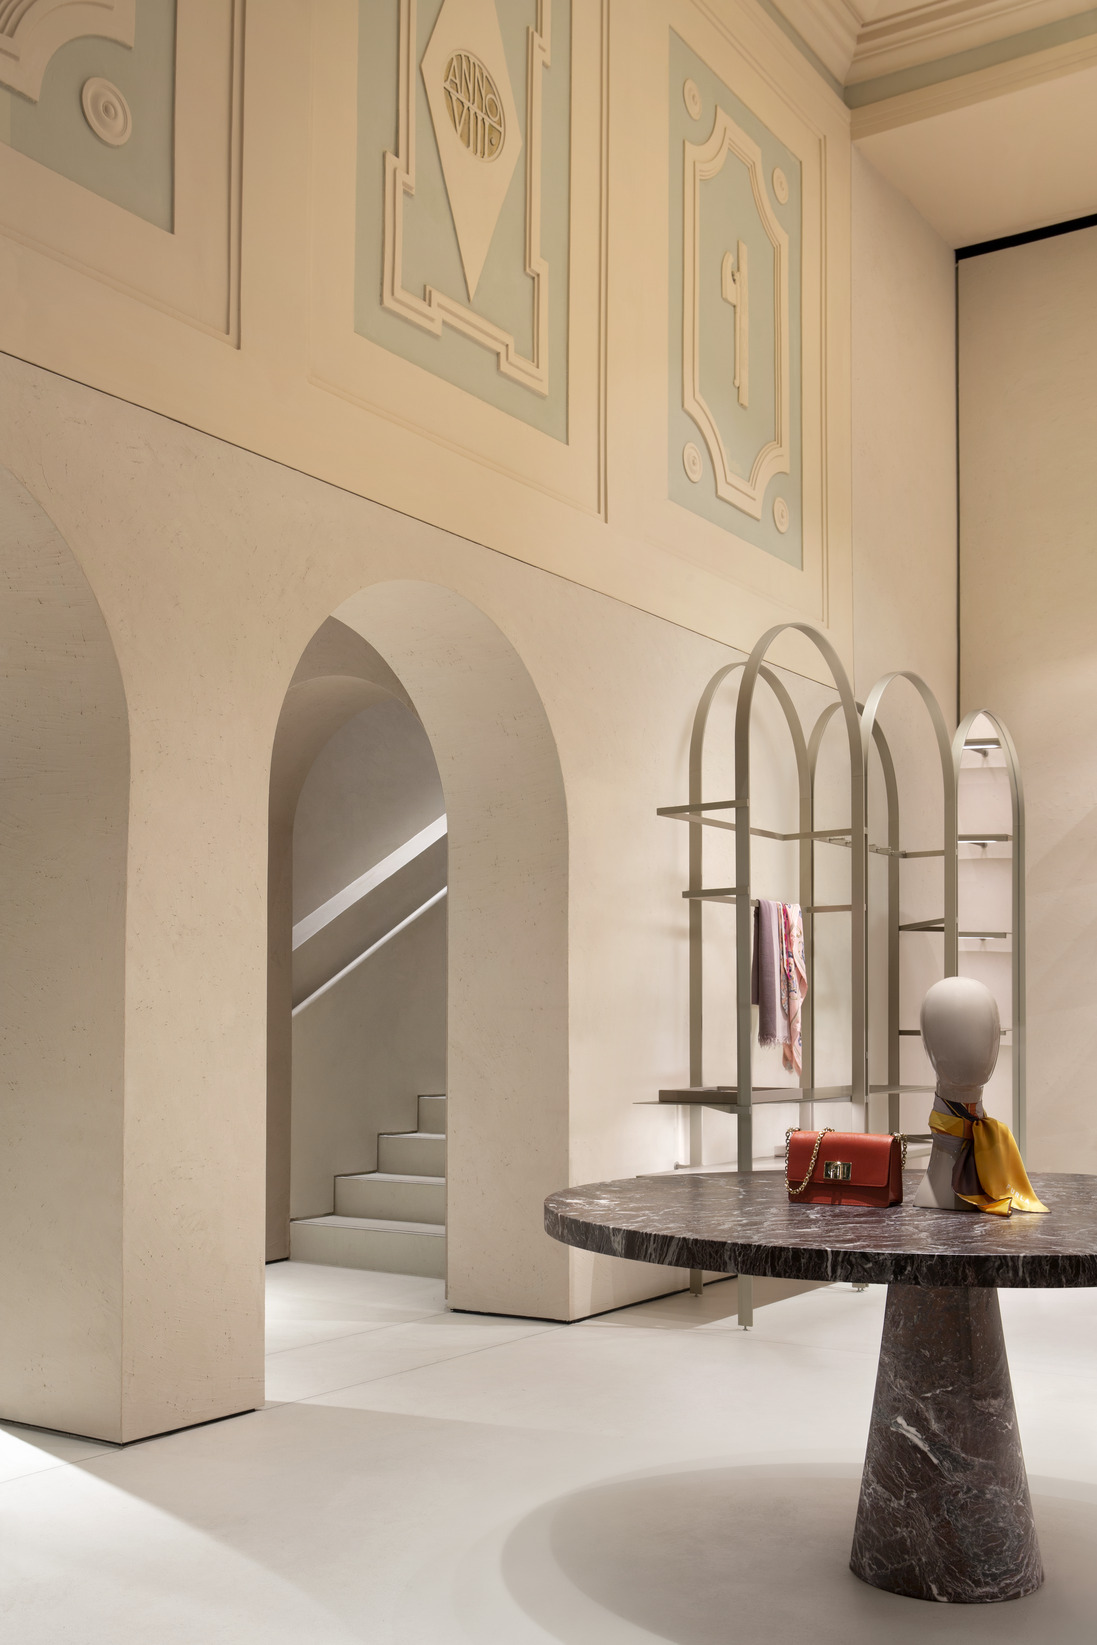 Furla store concept • David Chipperfield Architects